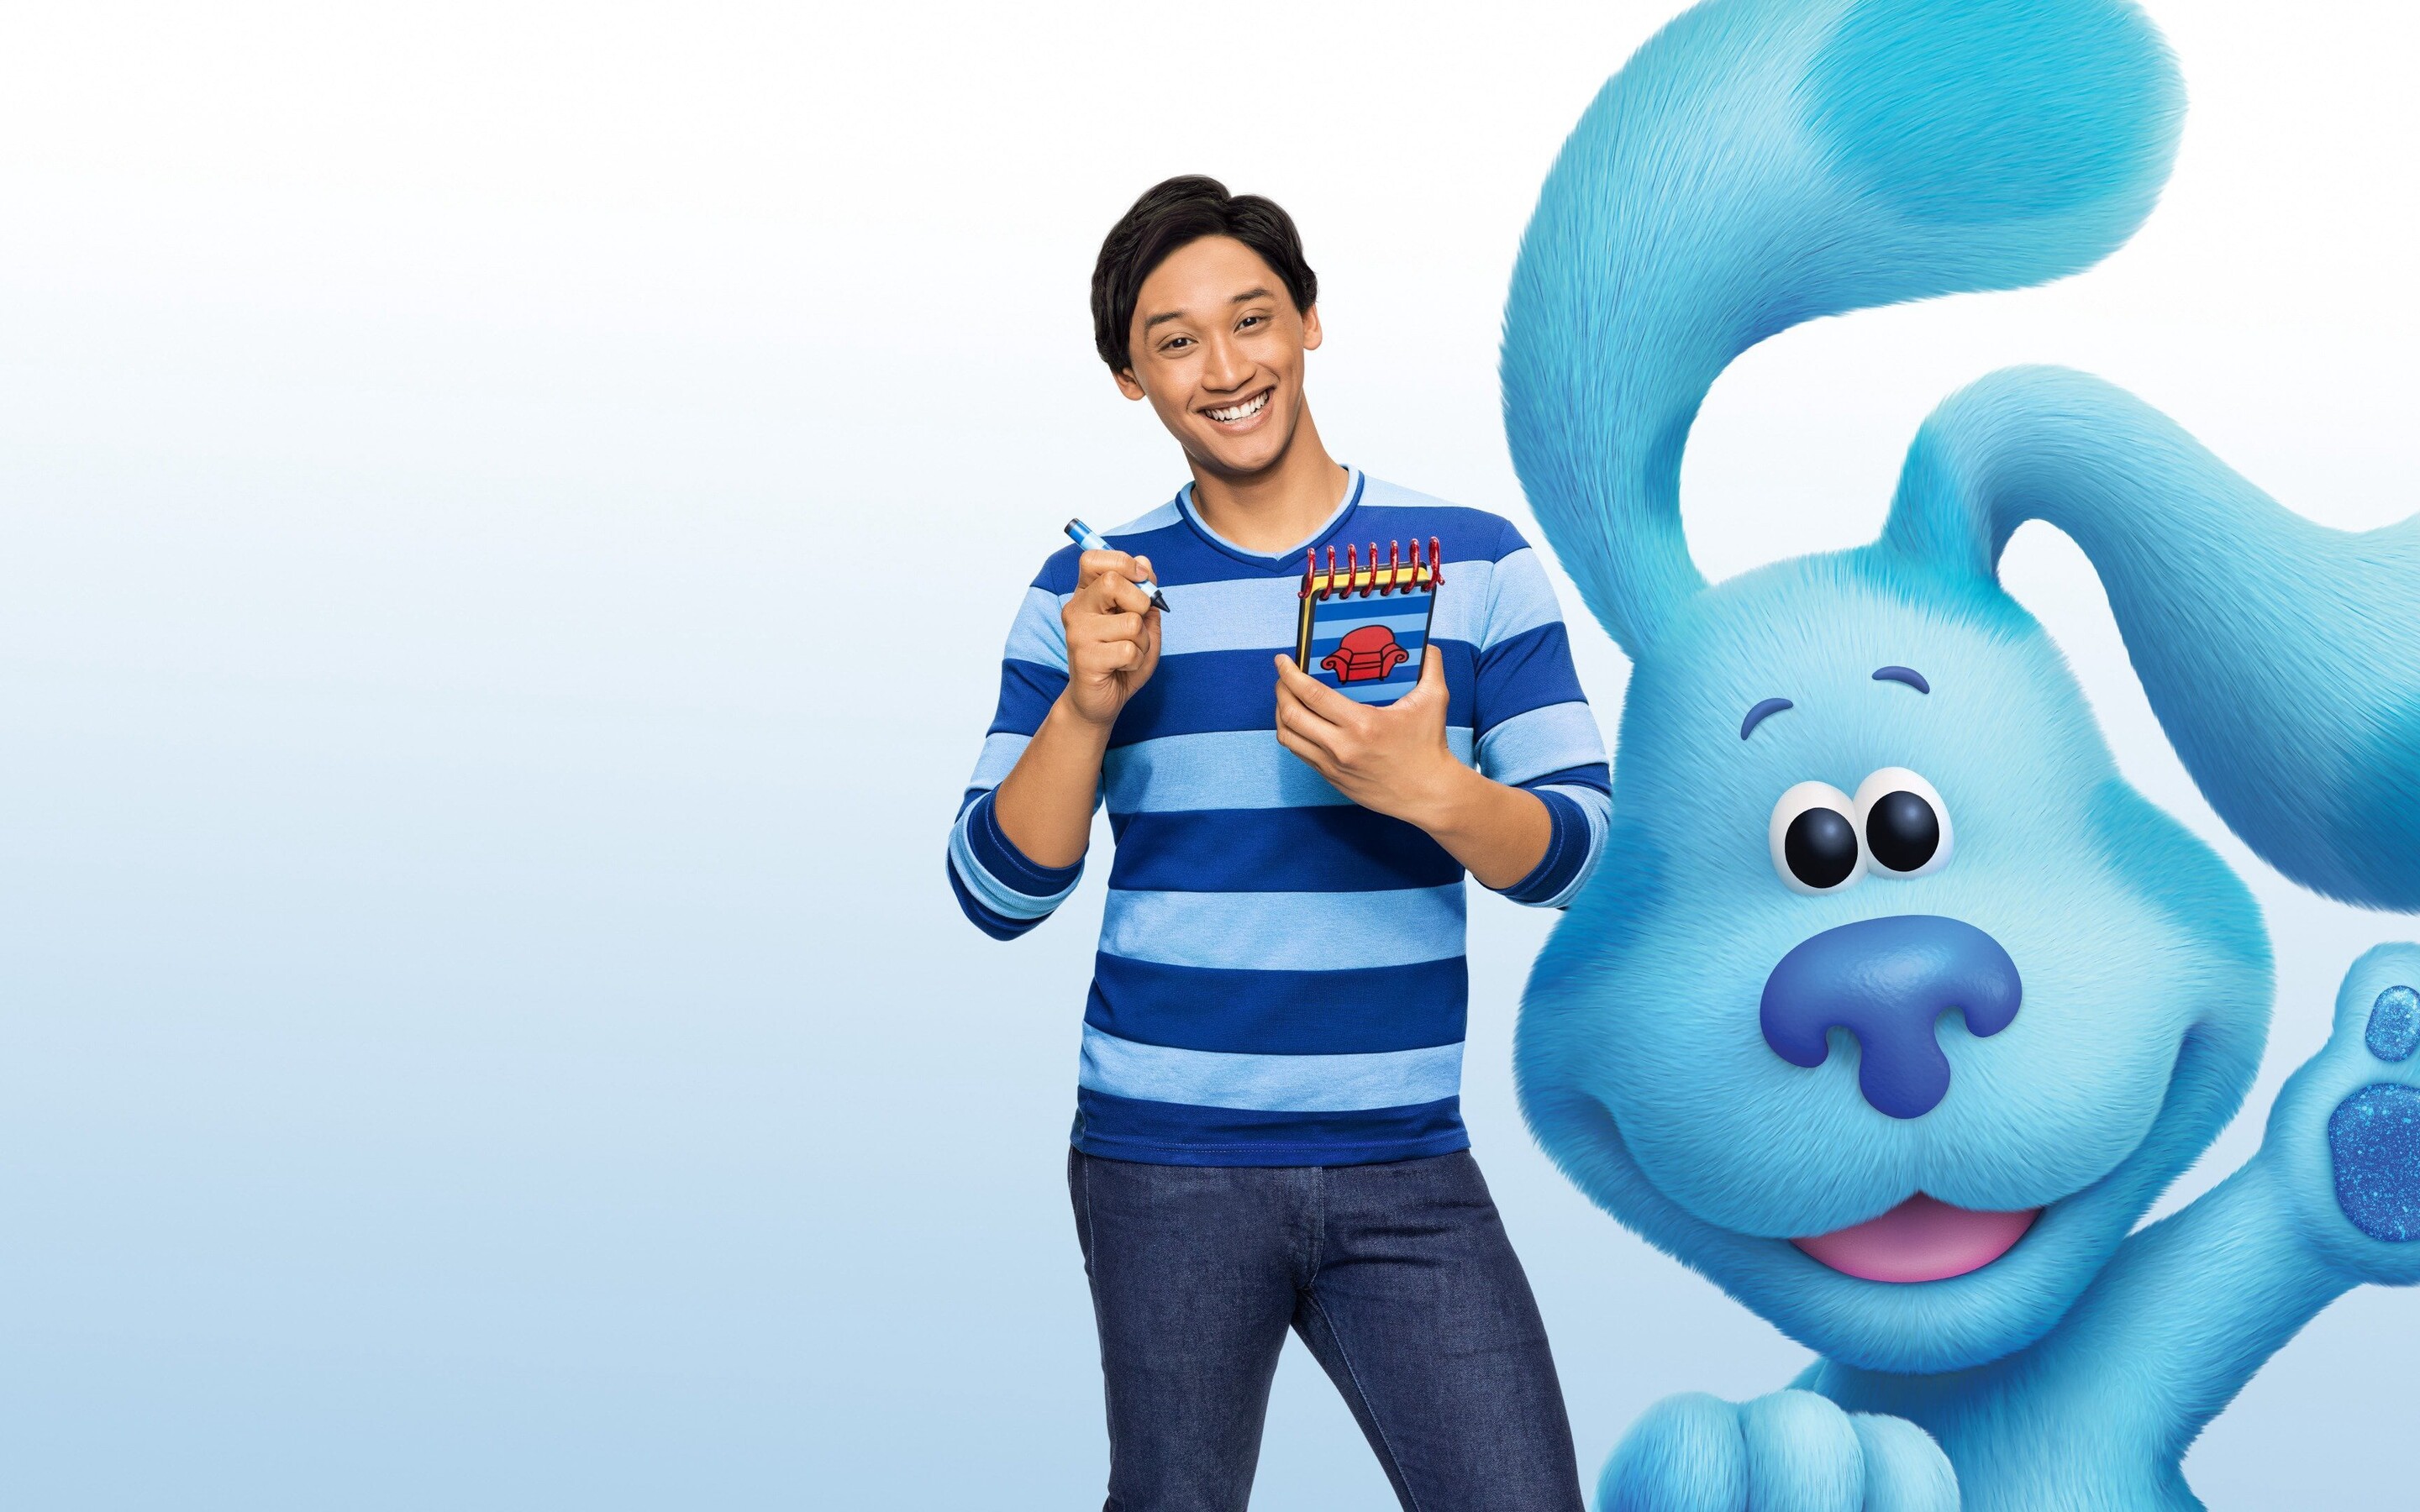 Blues Clues And You In 2880x1800 Resolution. blues-clues-and-you-sv.jpg. 